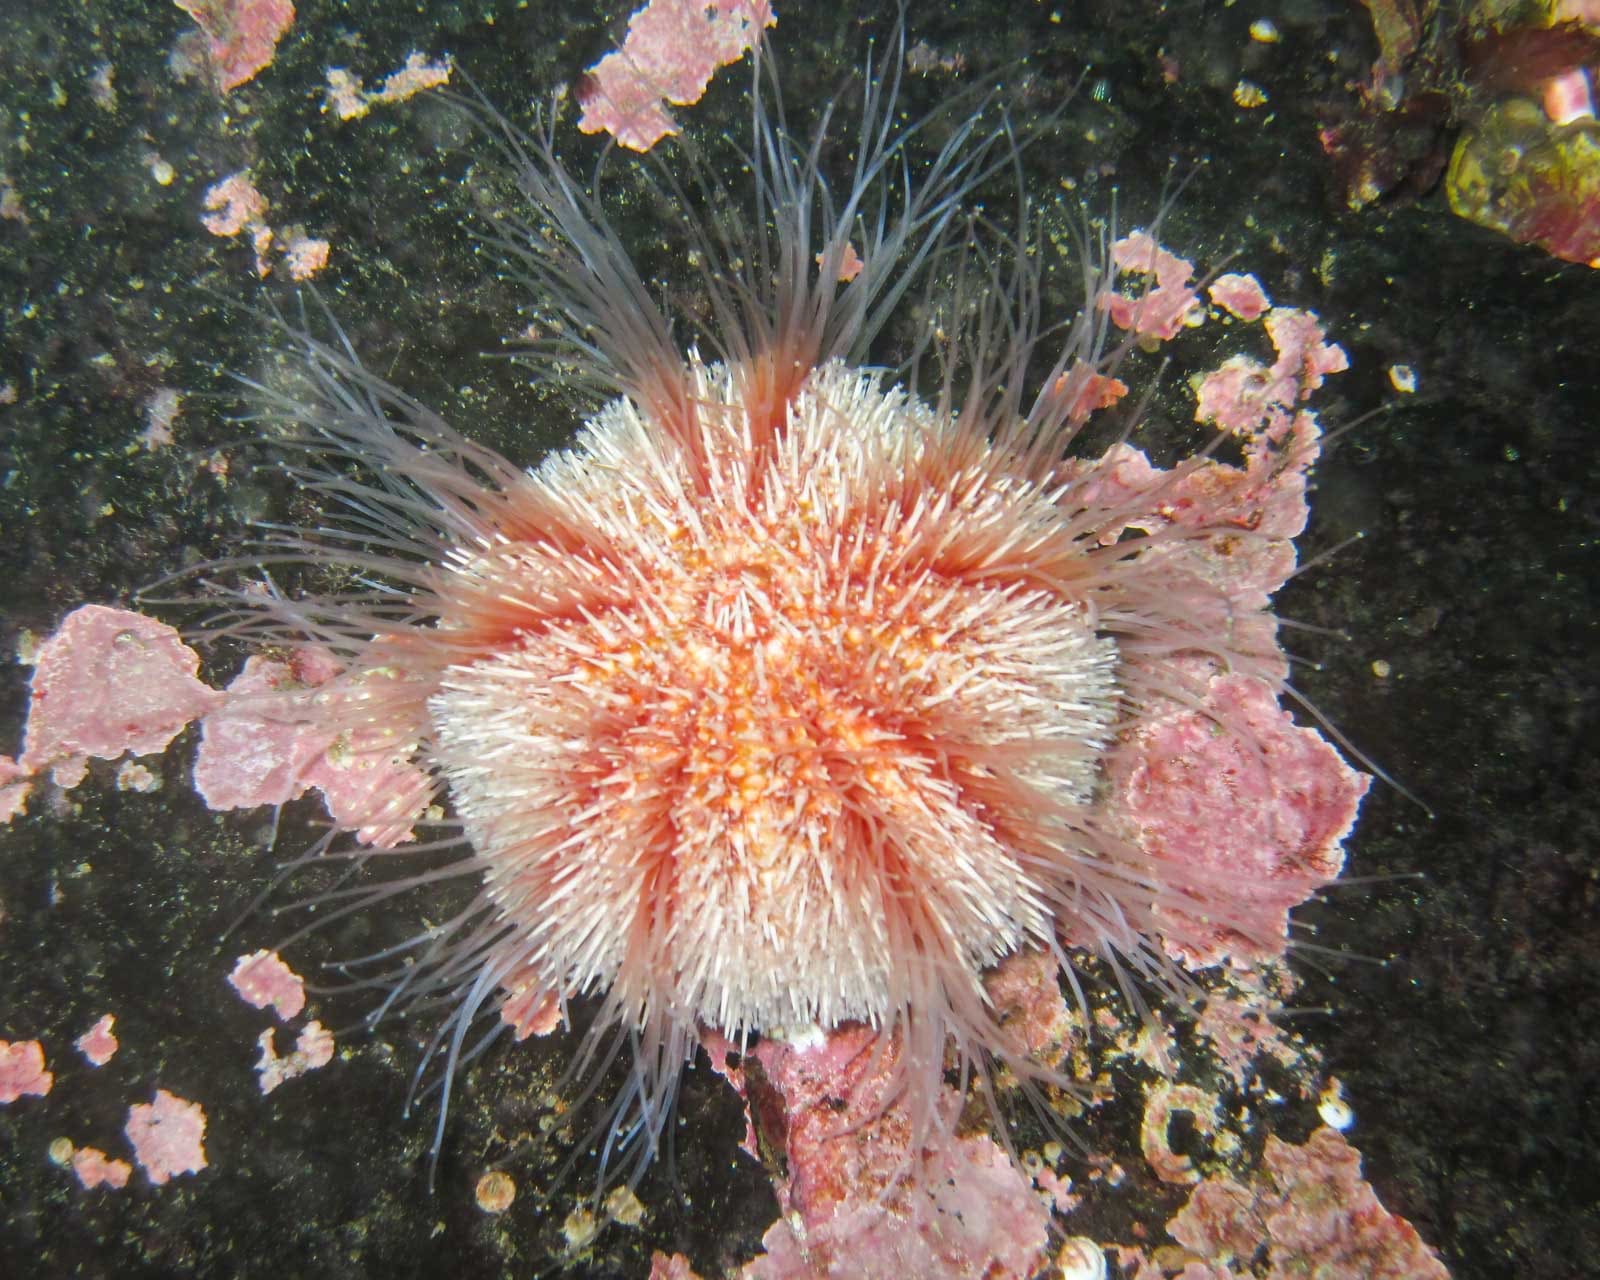 Sea urchins in the UK – More than just a pretty shell